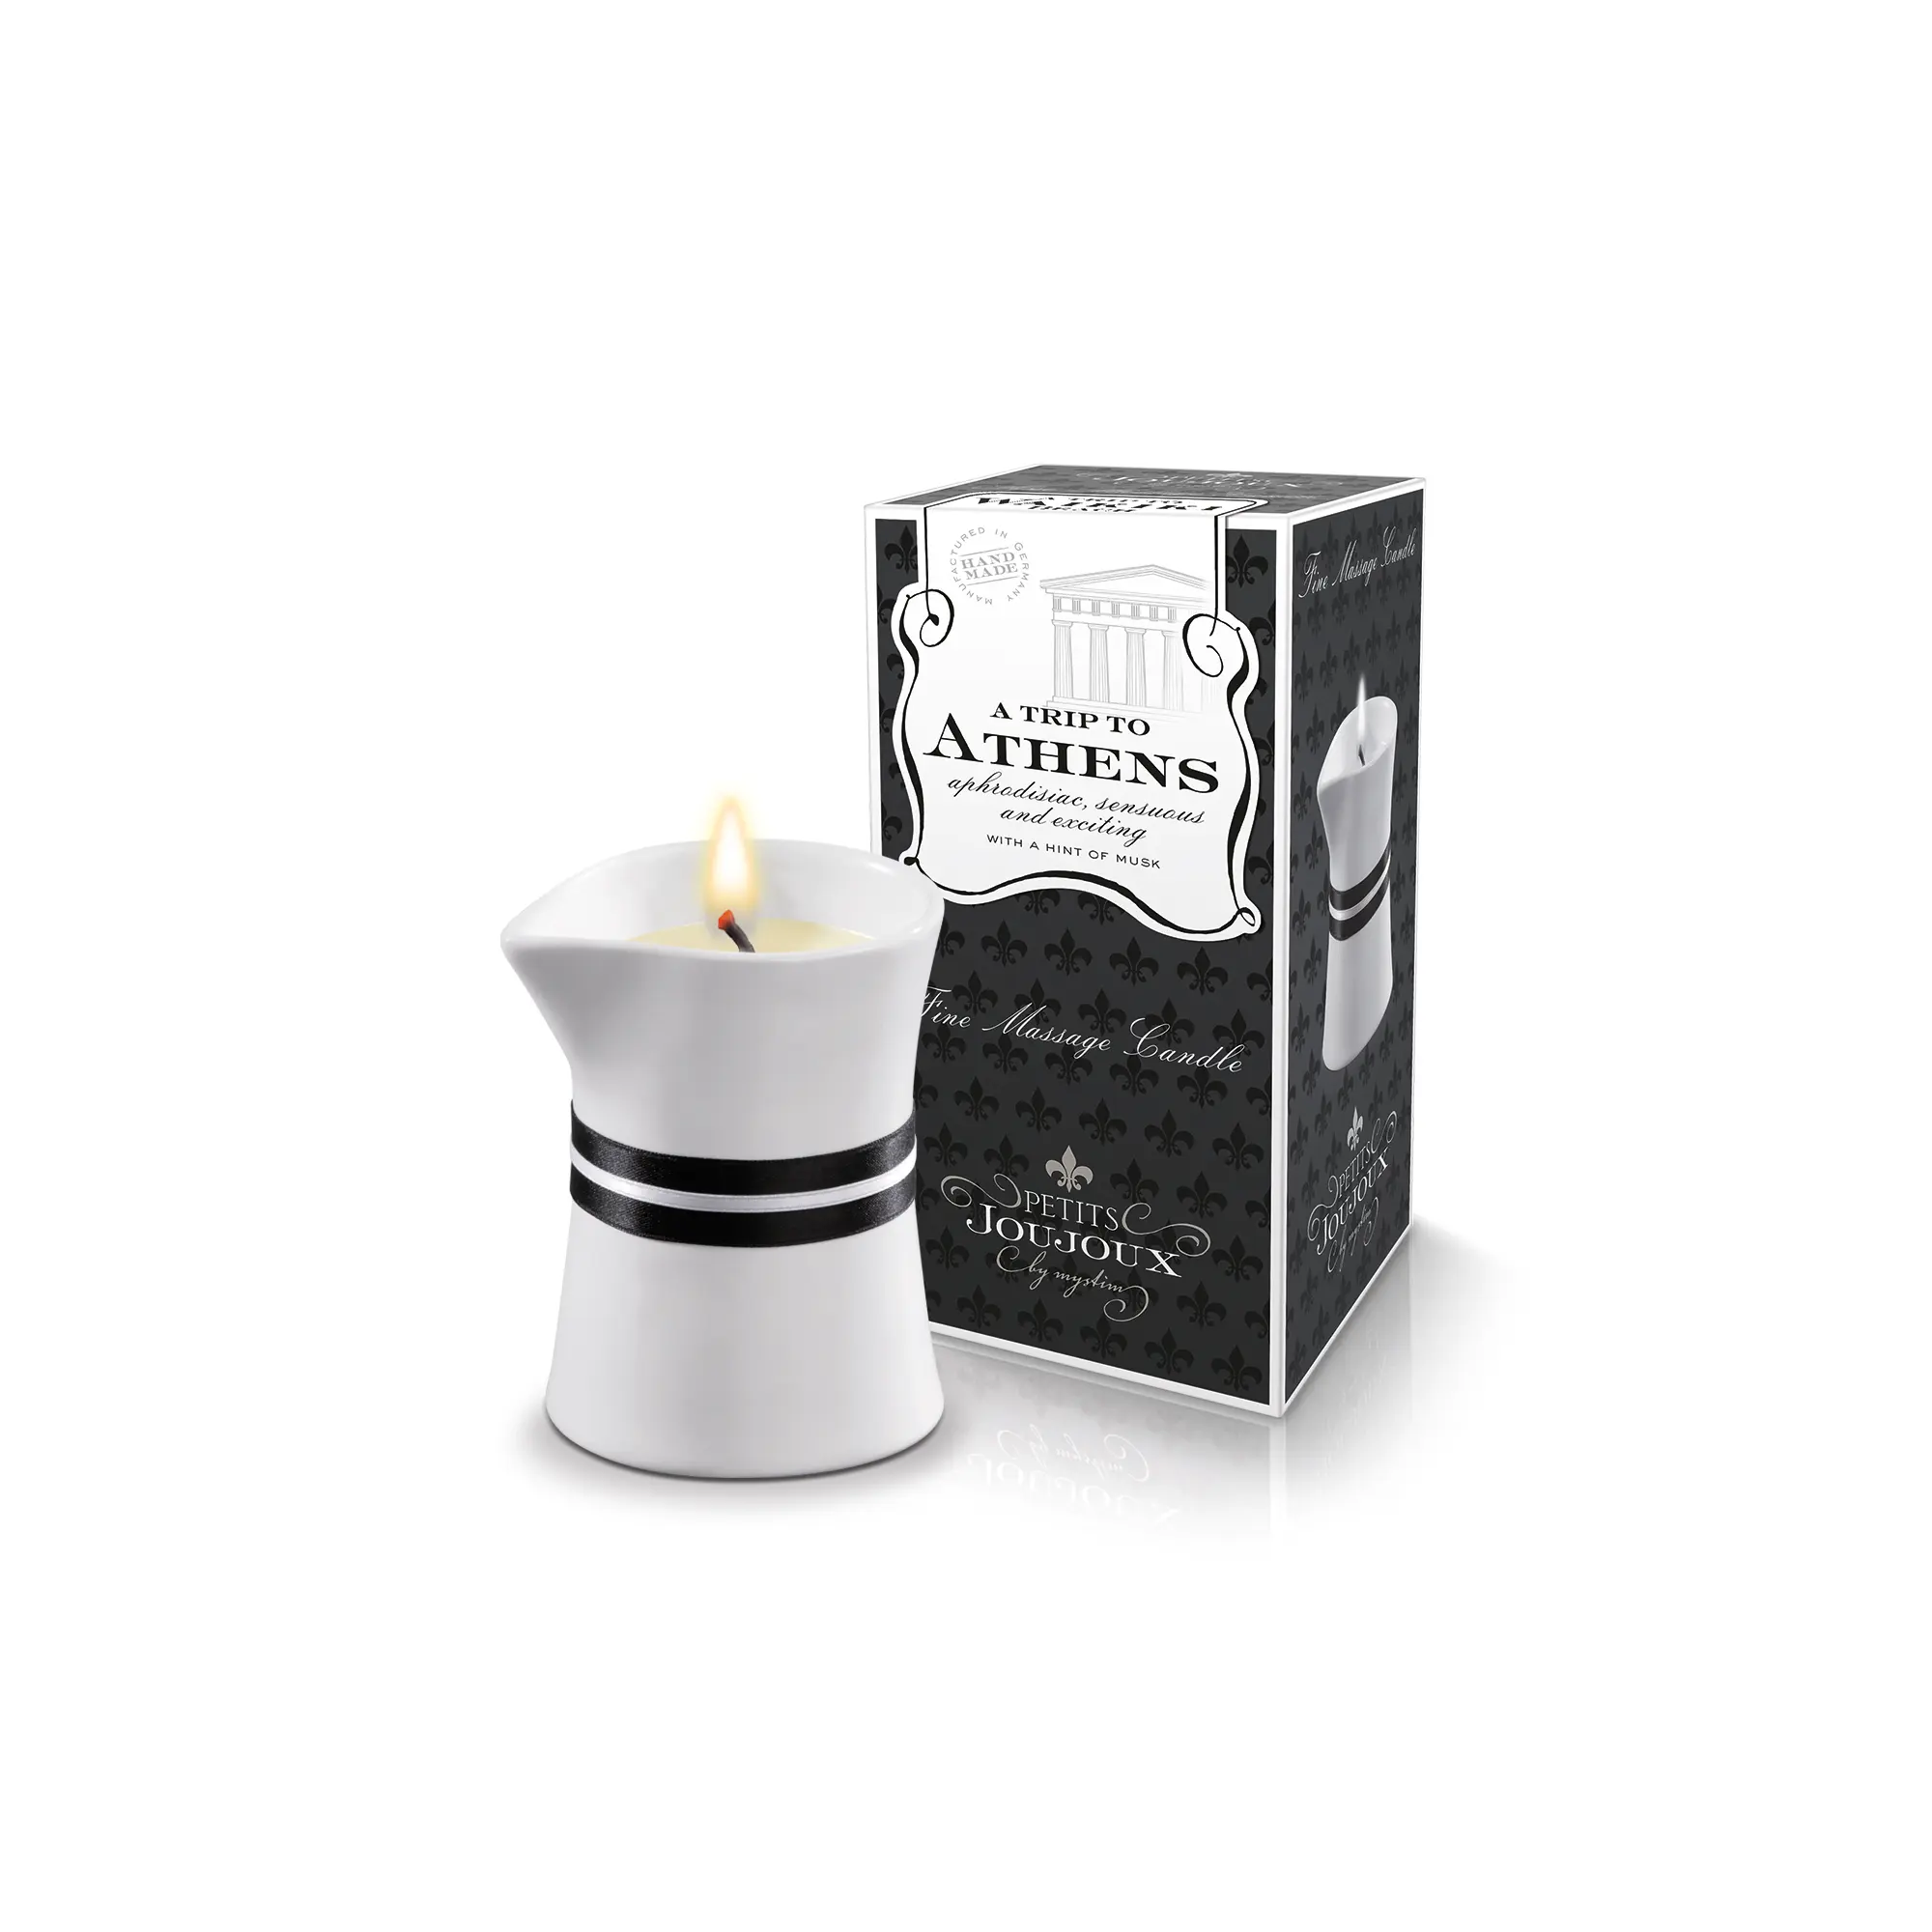 A trip to Athens - Candle 4.23 oz